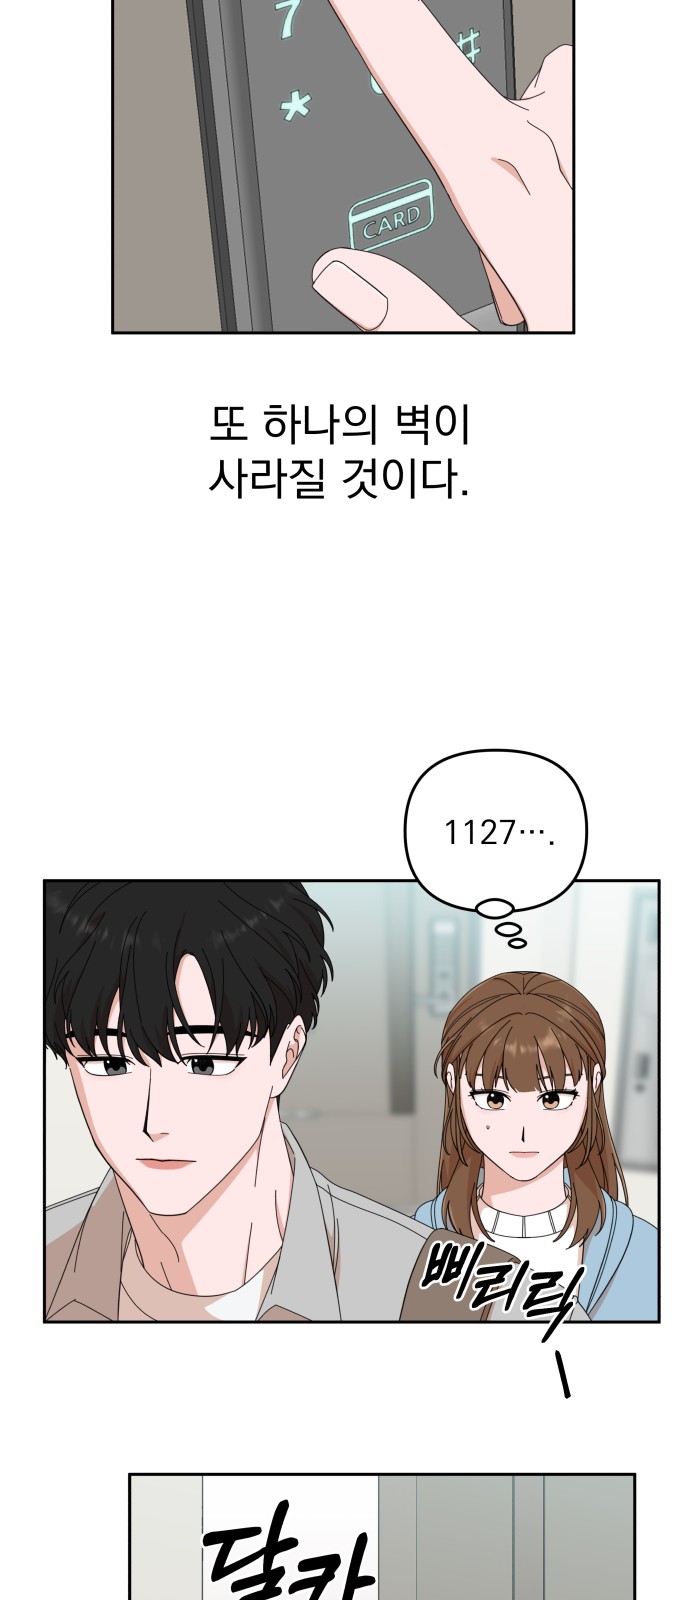 The Man With Pretty Lips - Chapter 4 - Page 70